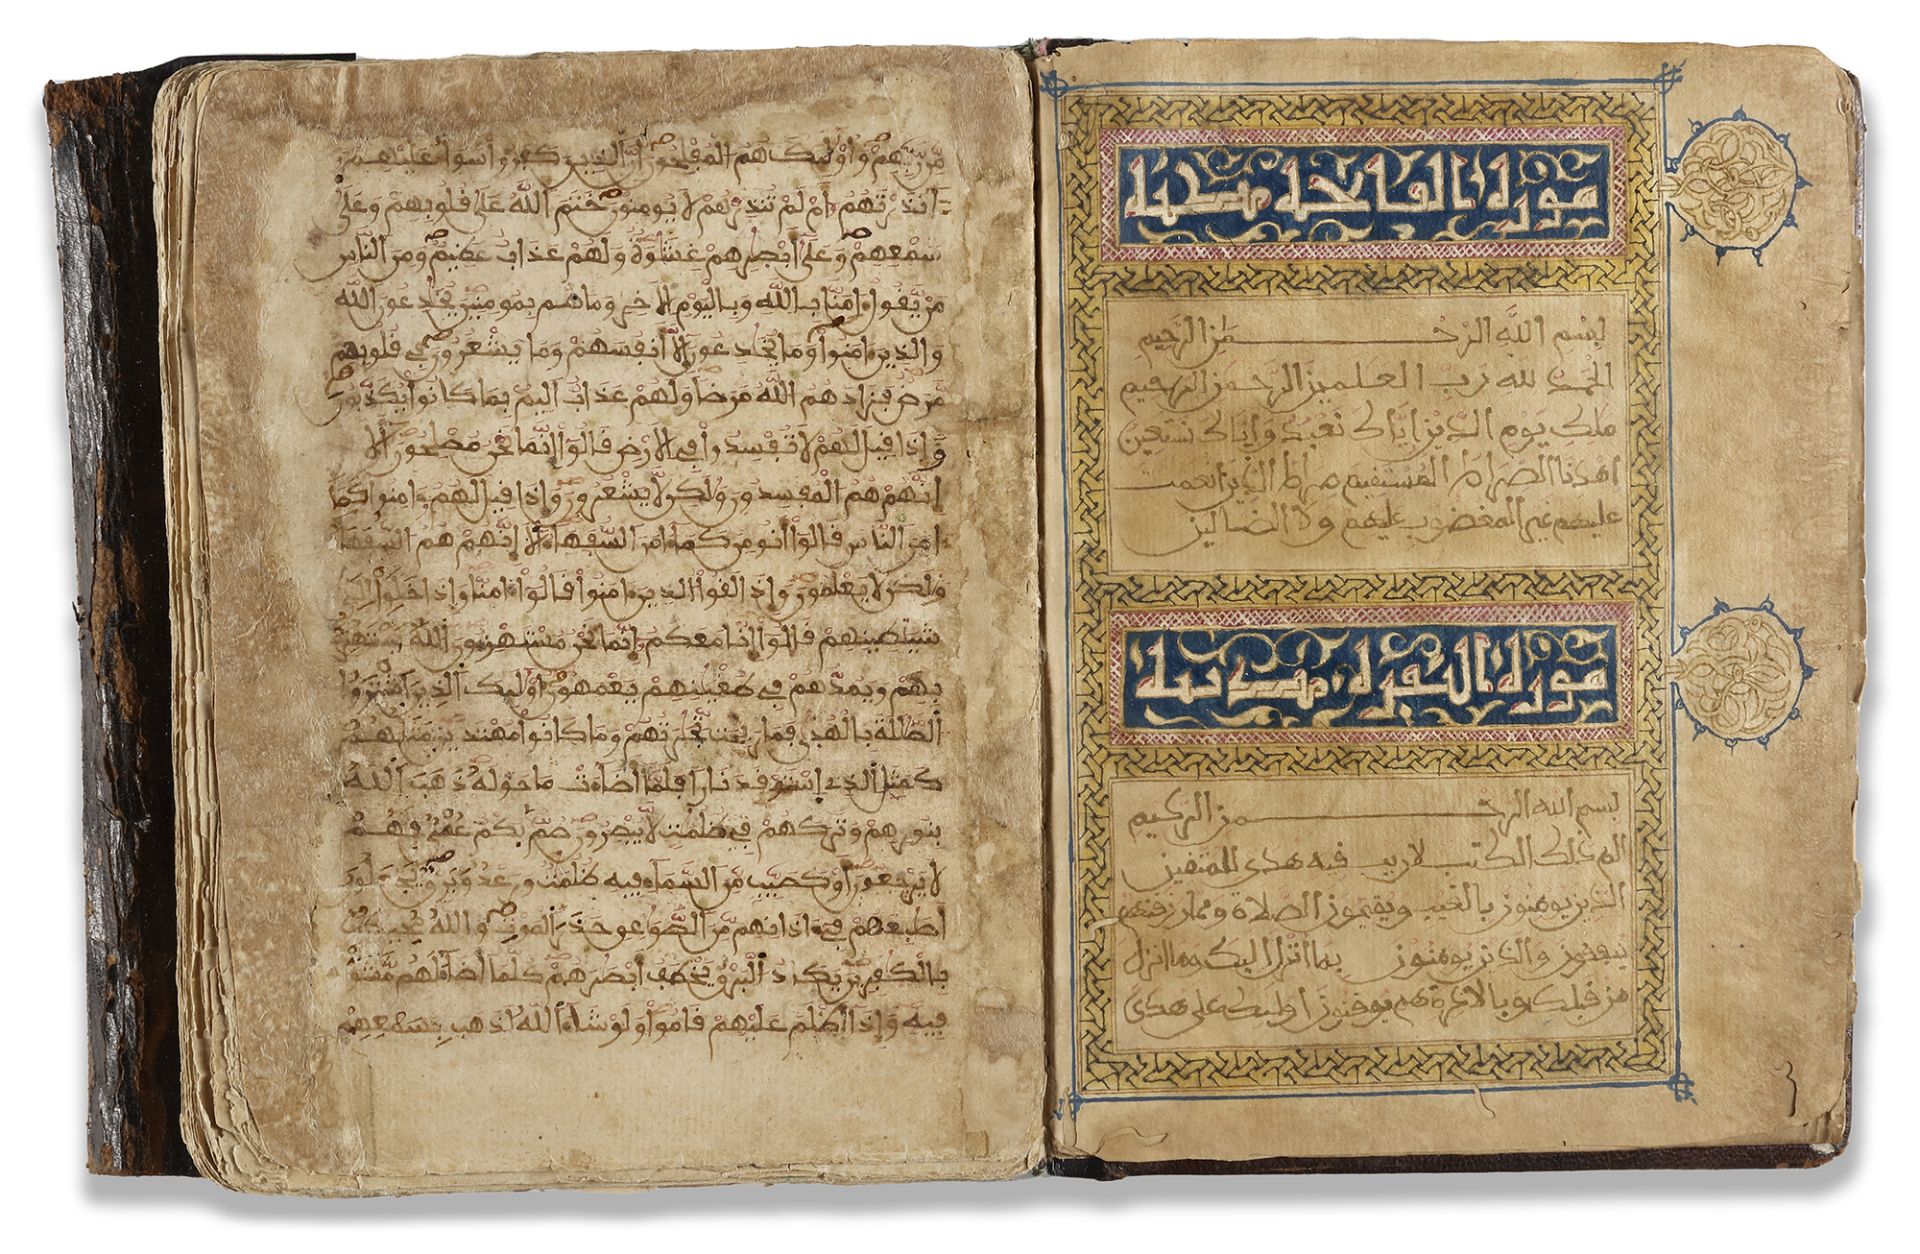 A QURAN IN MAGHRIBI SCRIPT, NORTH AFRICA, DATED 1010 AH/1601 AD - Image 3 of 7